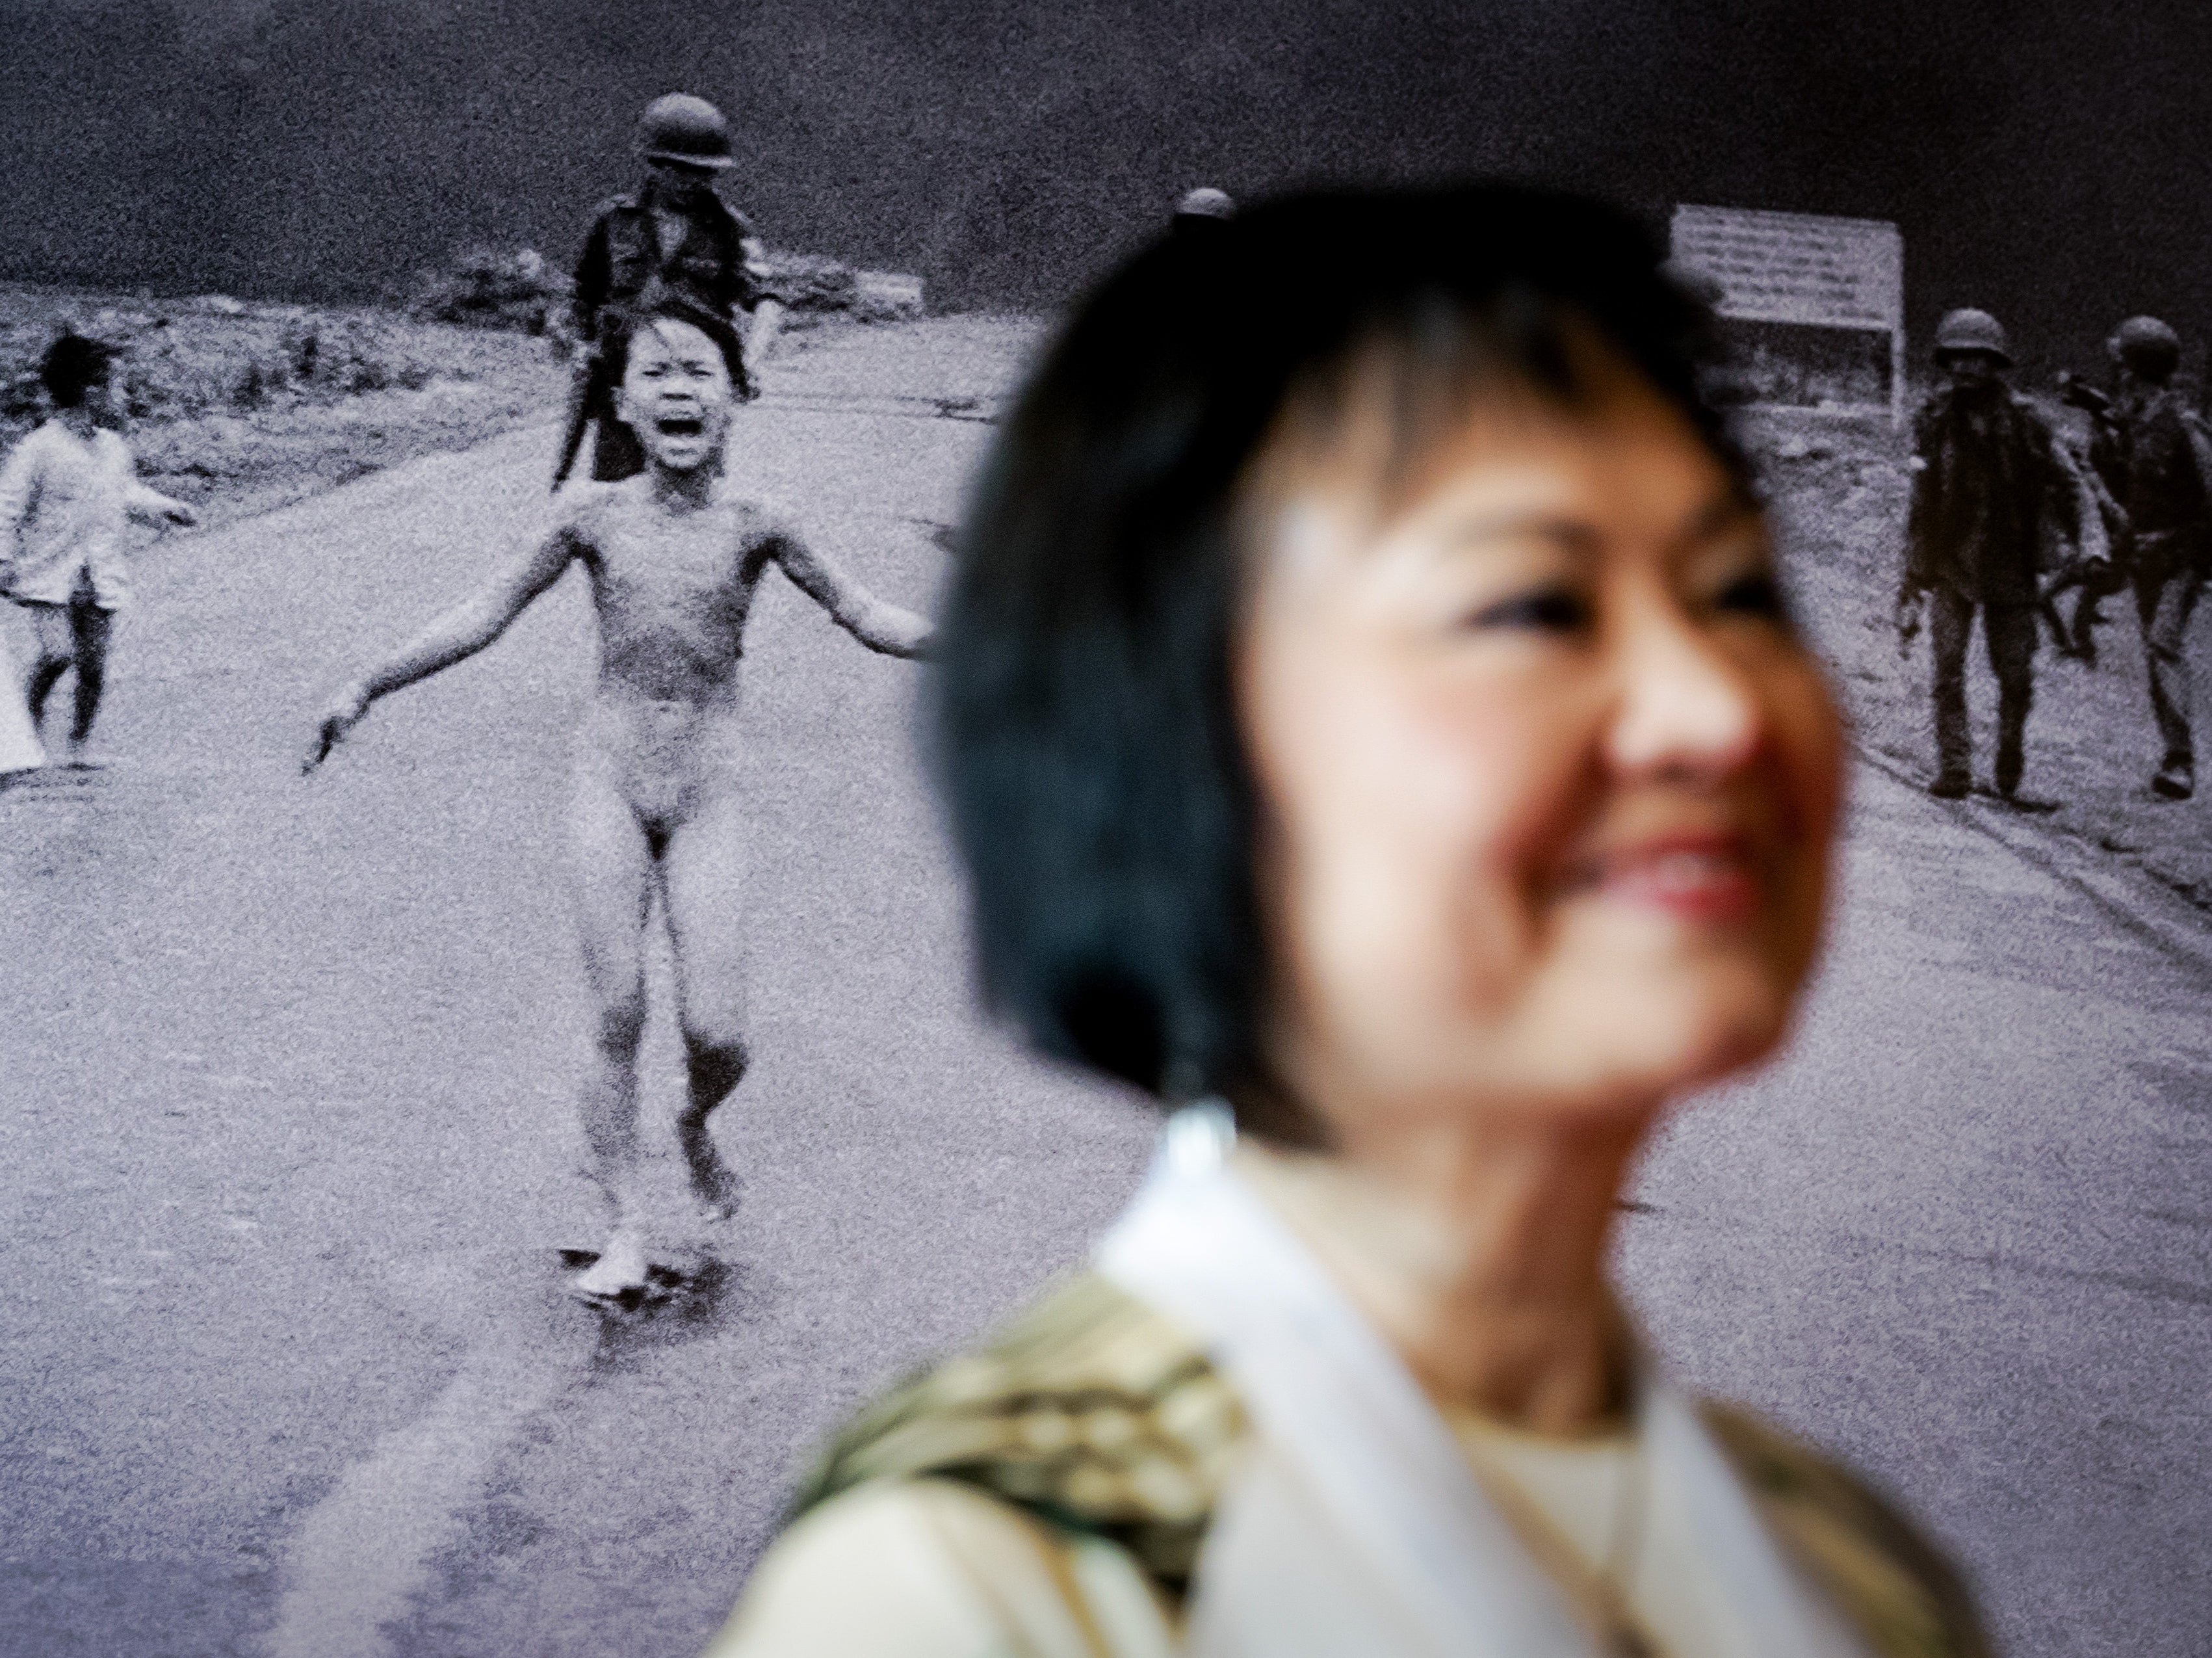 An image of Kim Phuc, frozen in time, changed the war in Vietnam